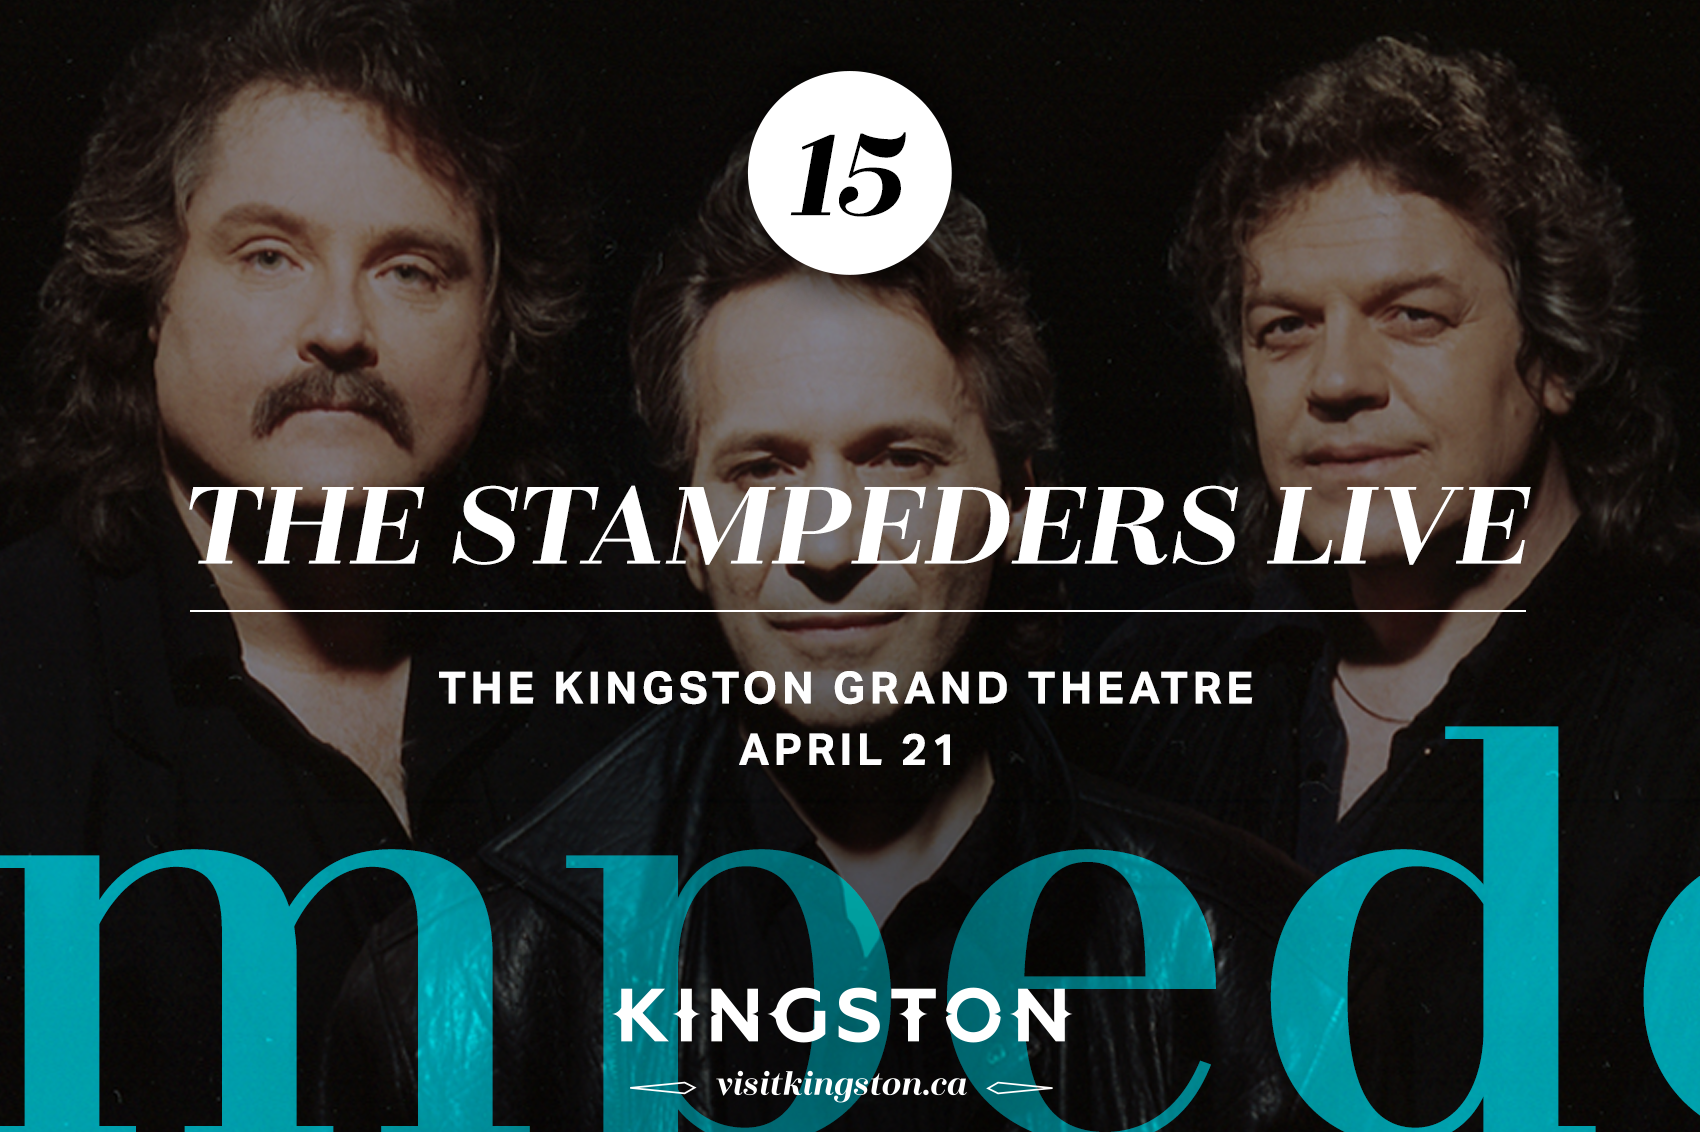 The Stampeders Live